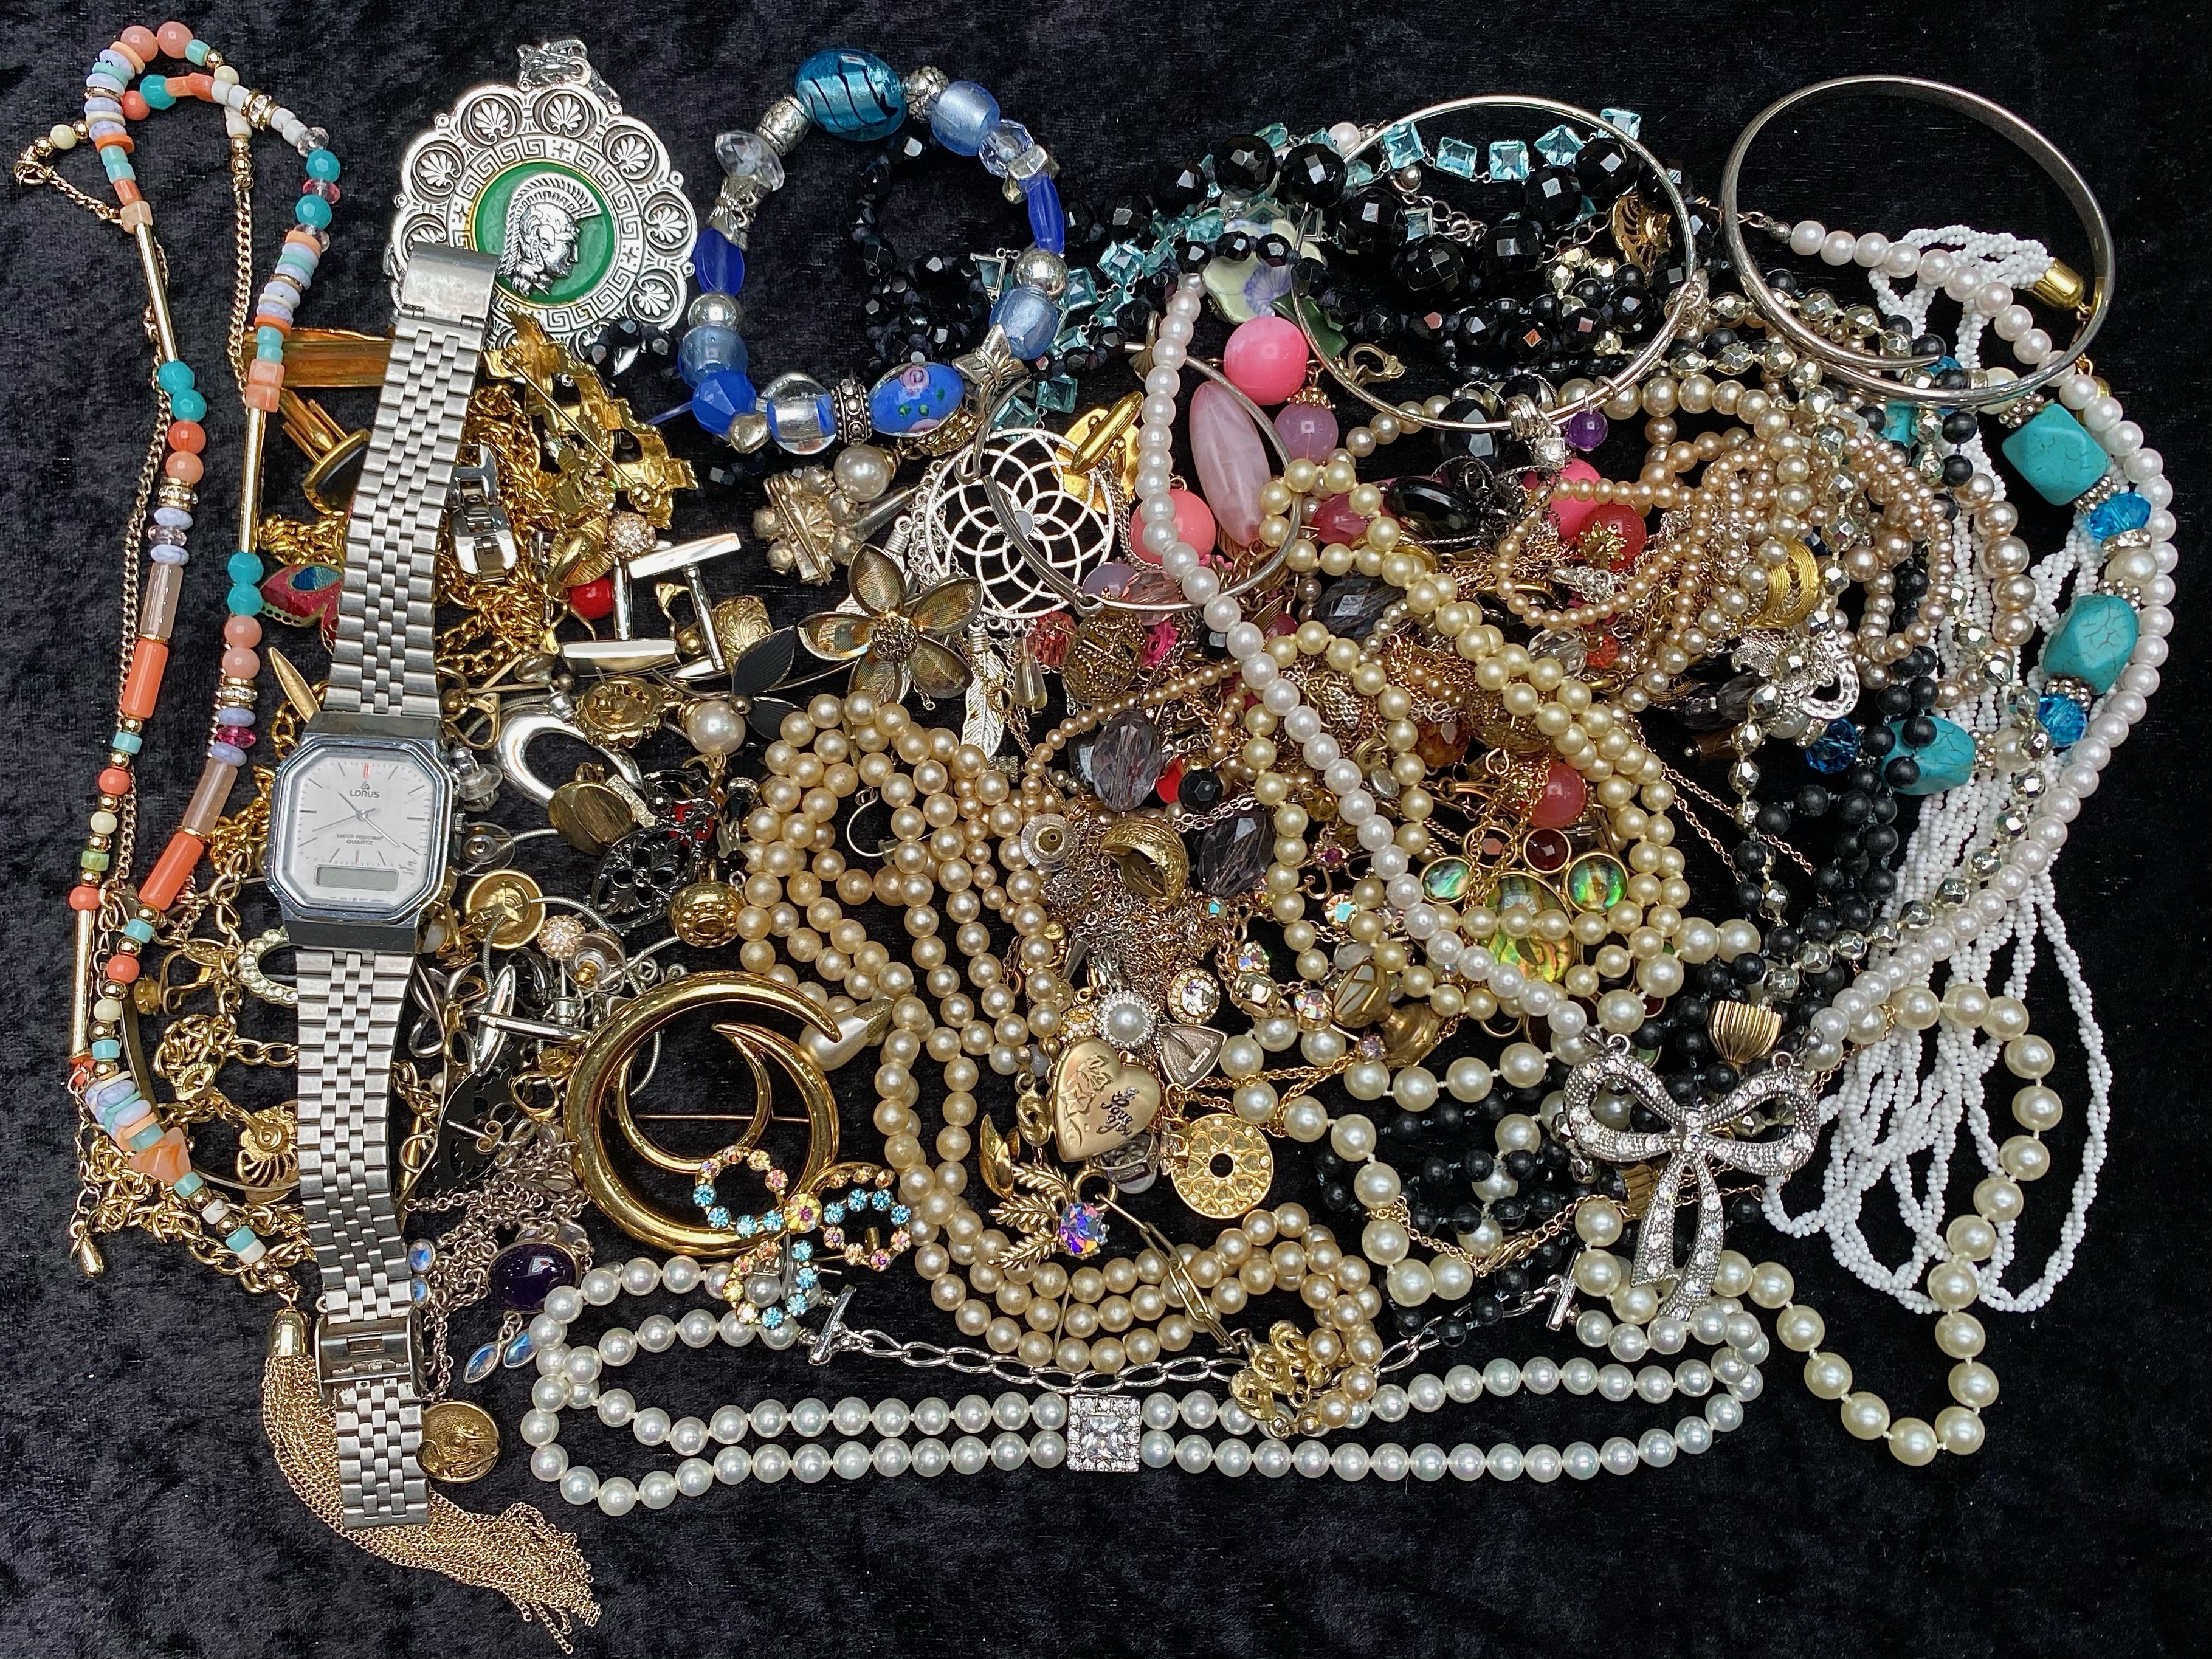 Collection of Costume Jewellery, including beads, pearls, chains, bangles, earrings, watches,